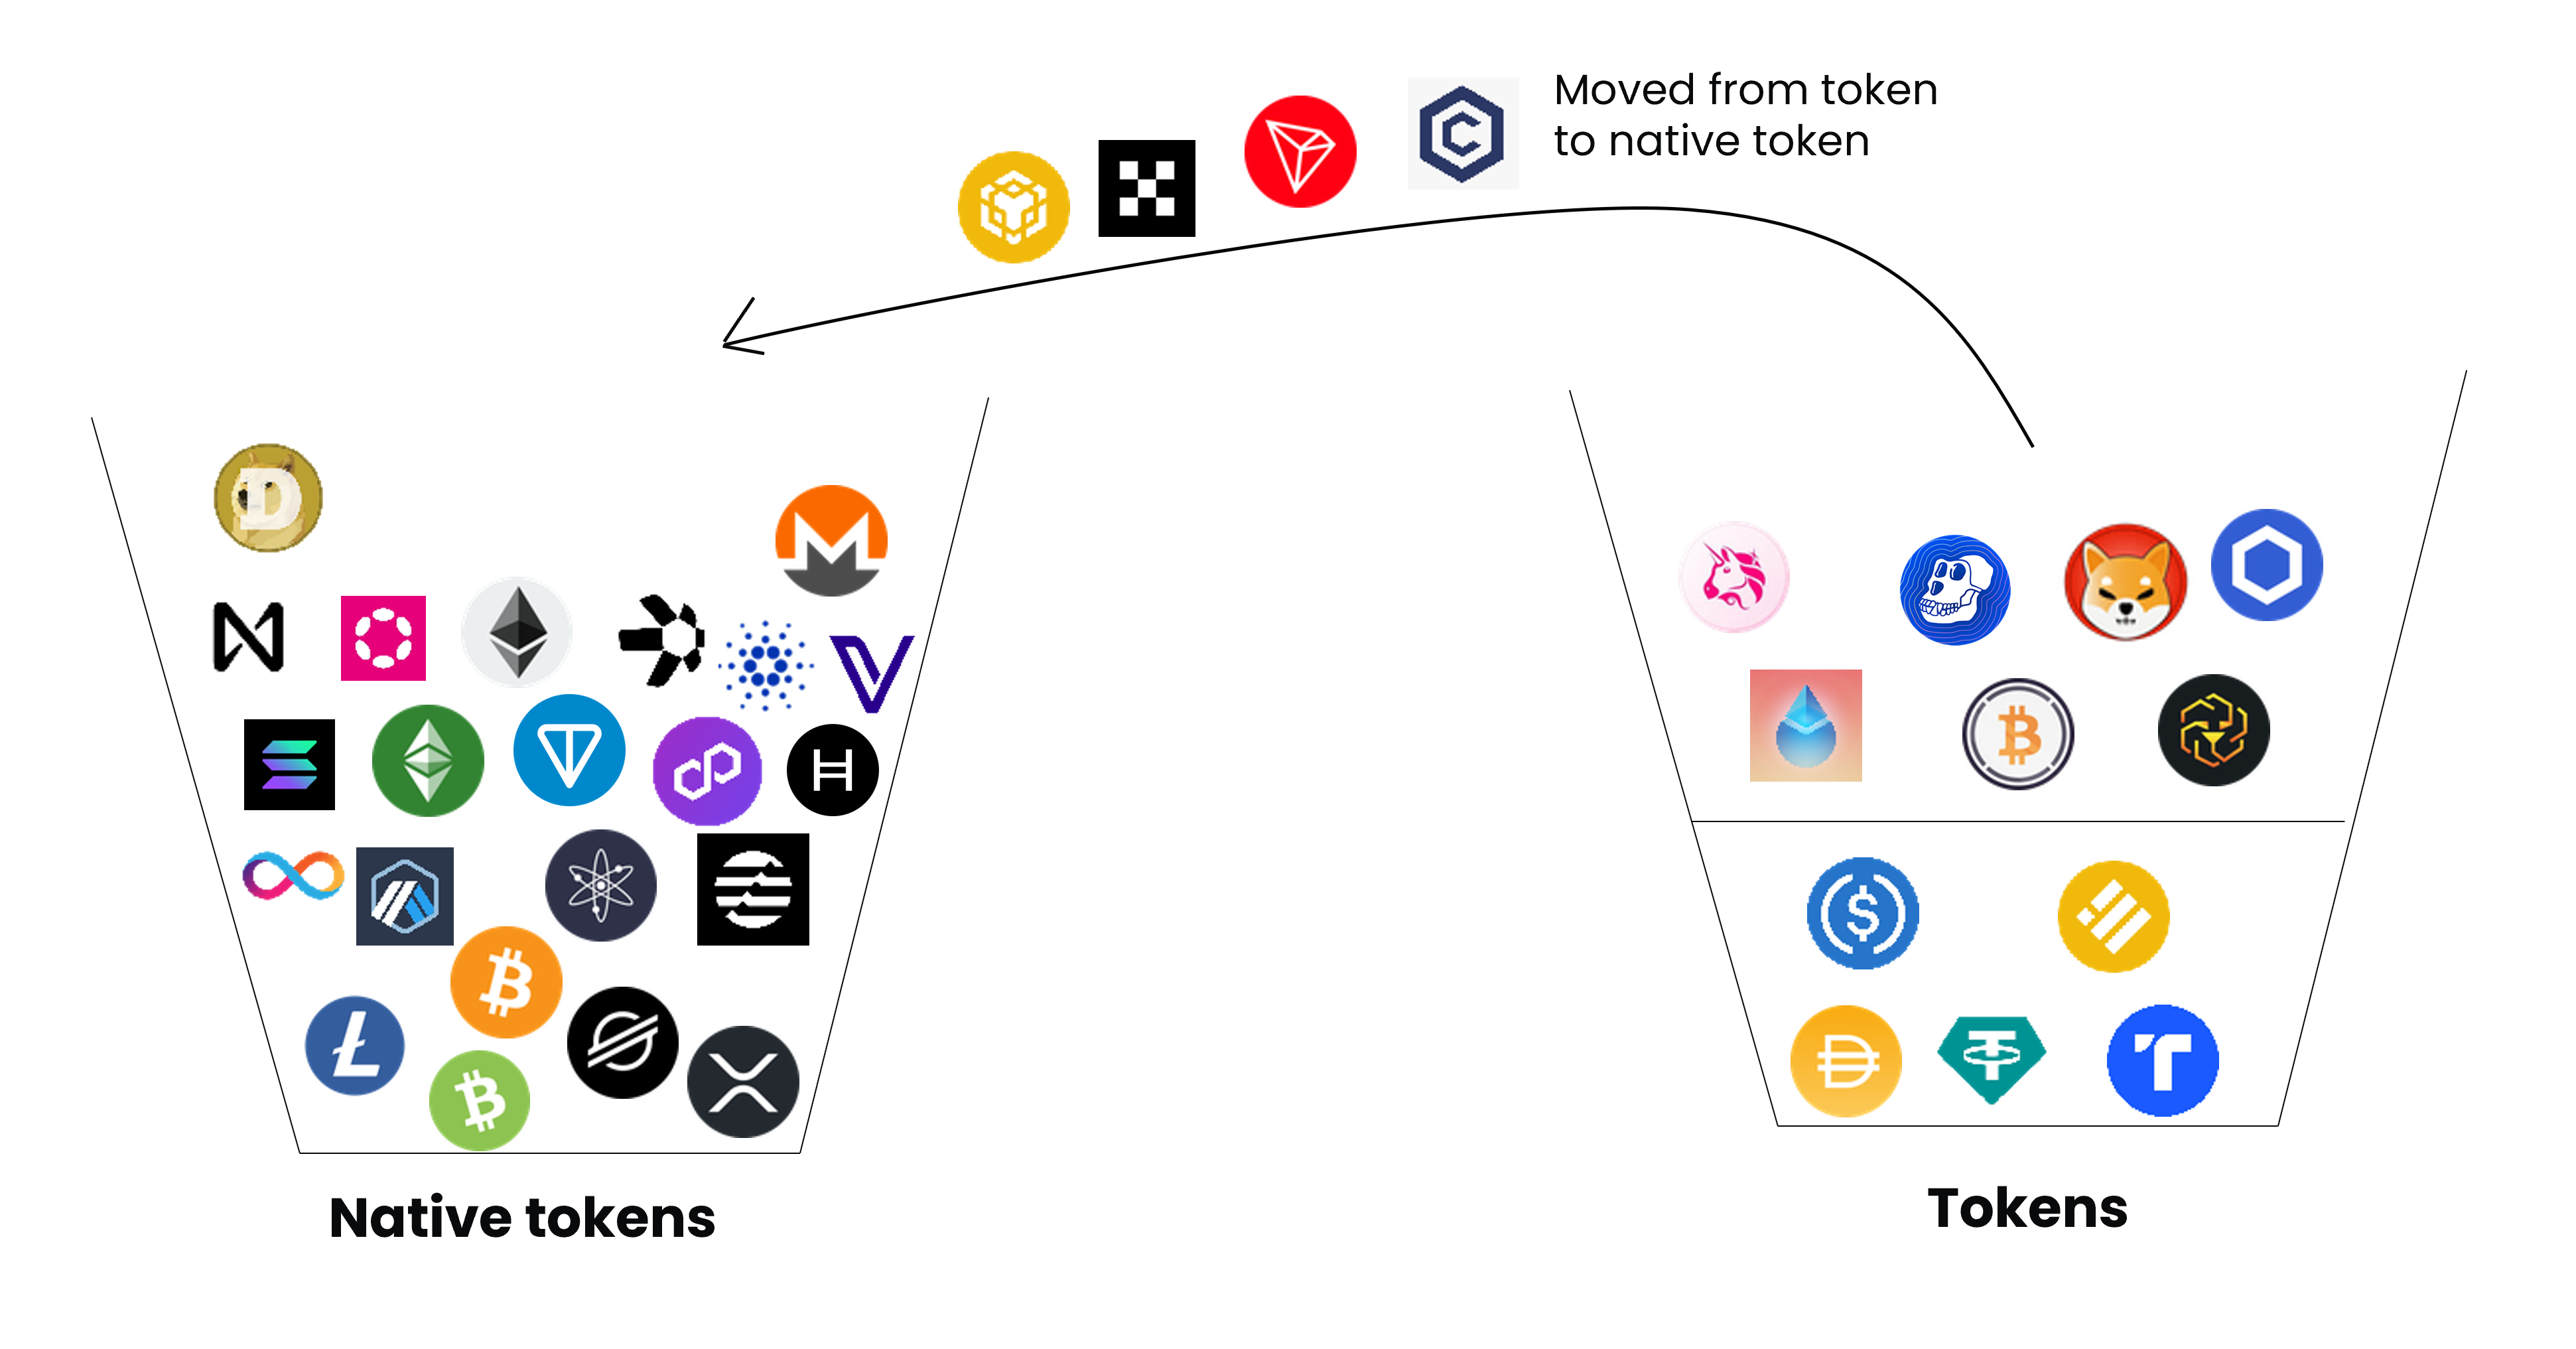 The difference between a native token and a token